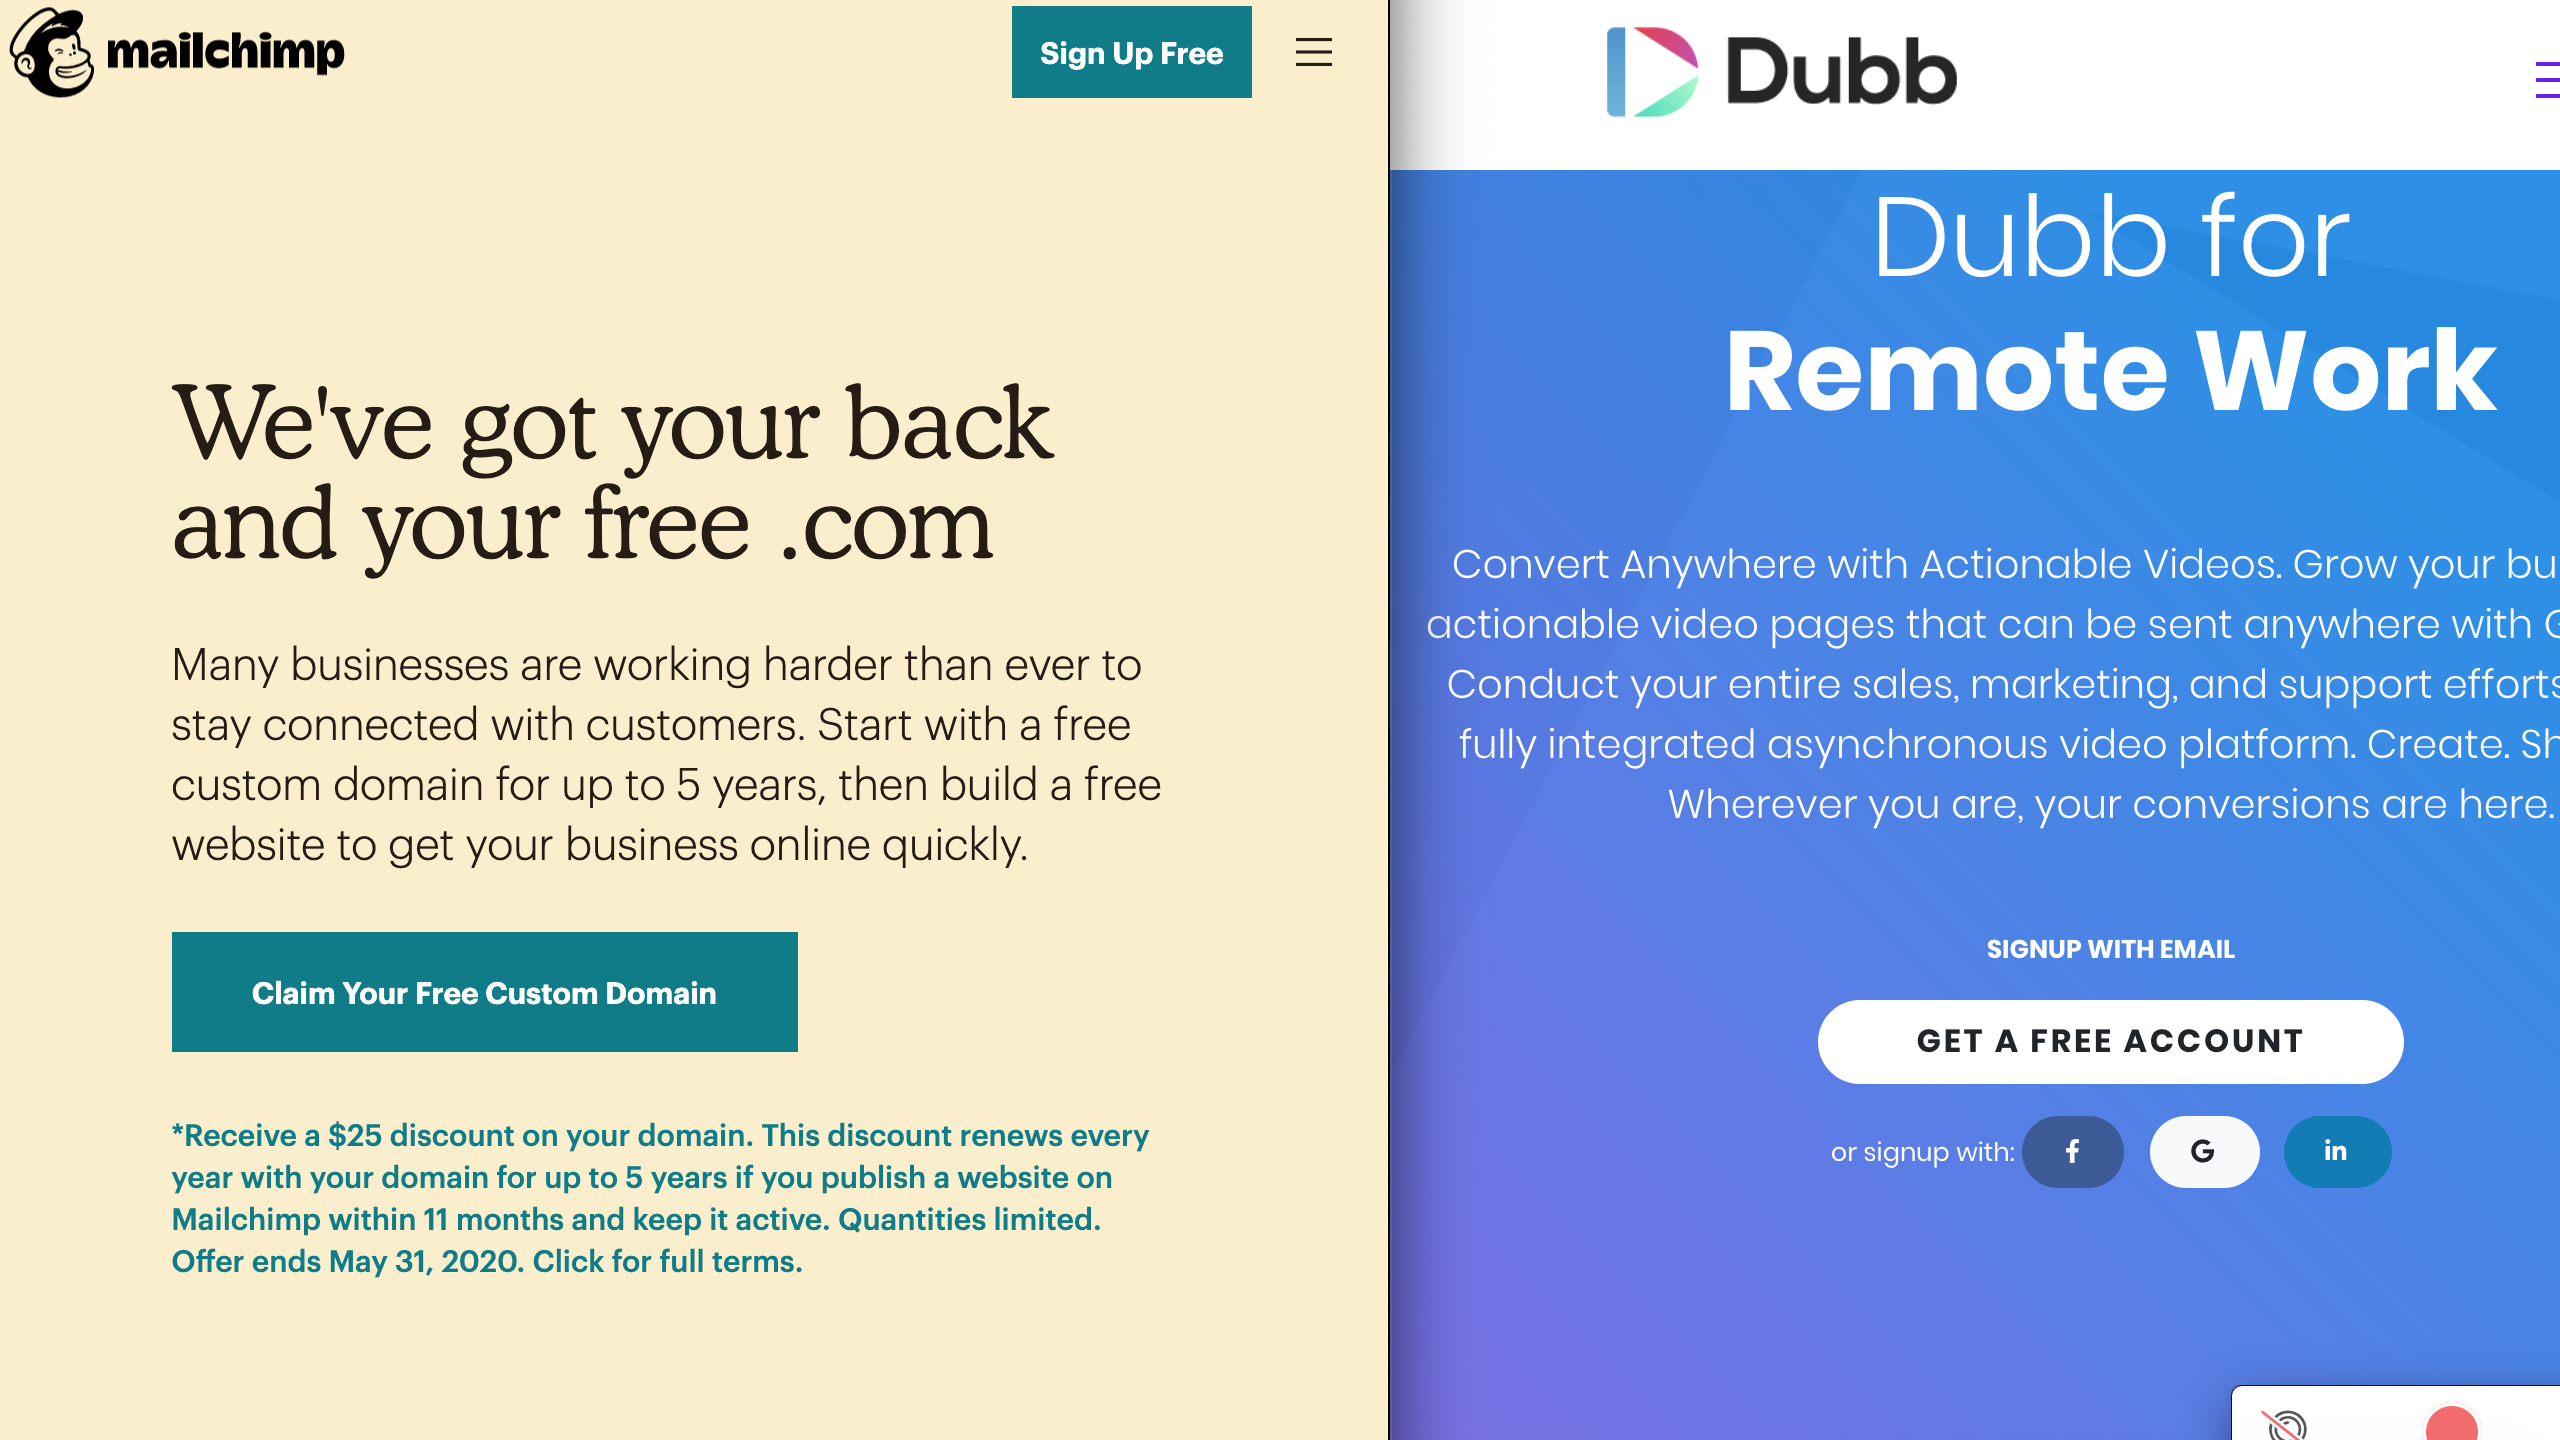 Mailchimp Homepage compared to Dubb Homepage